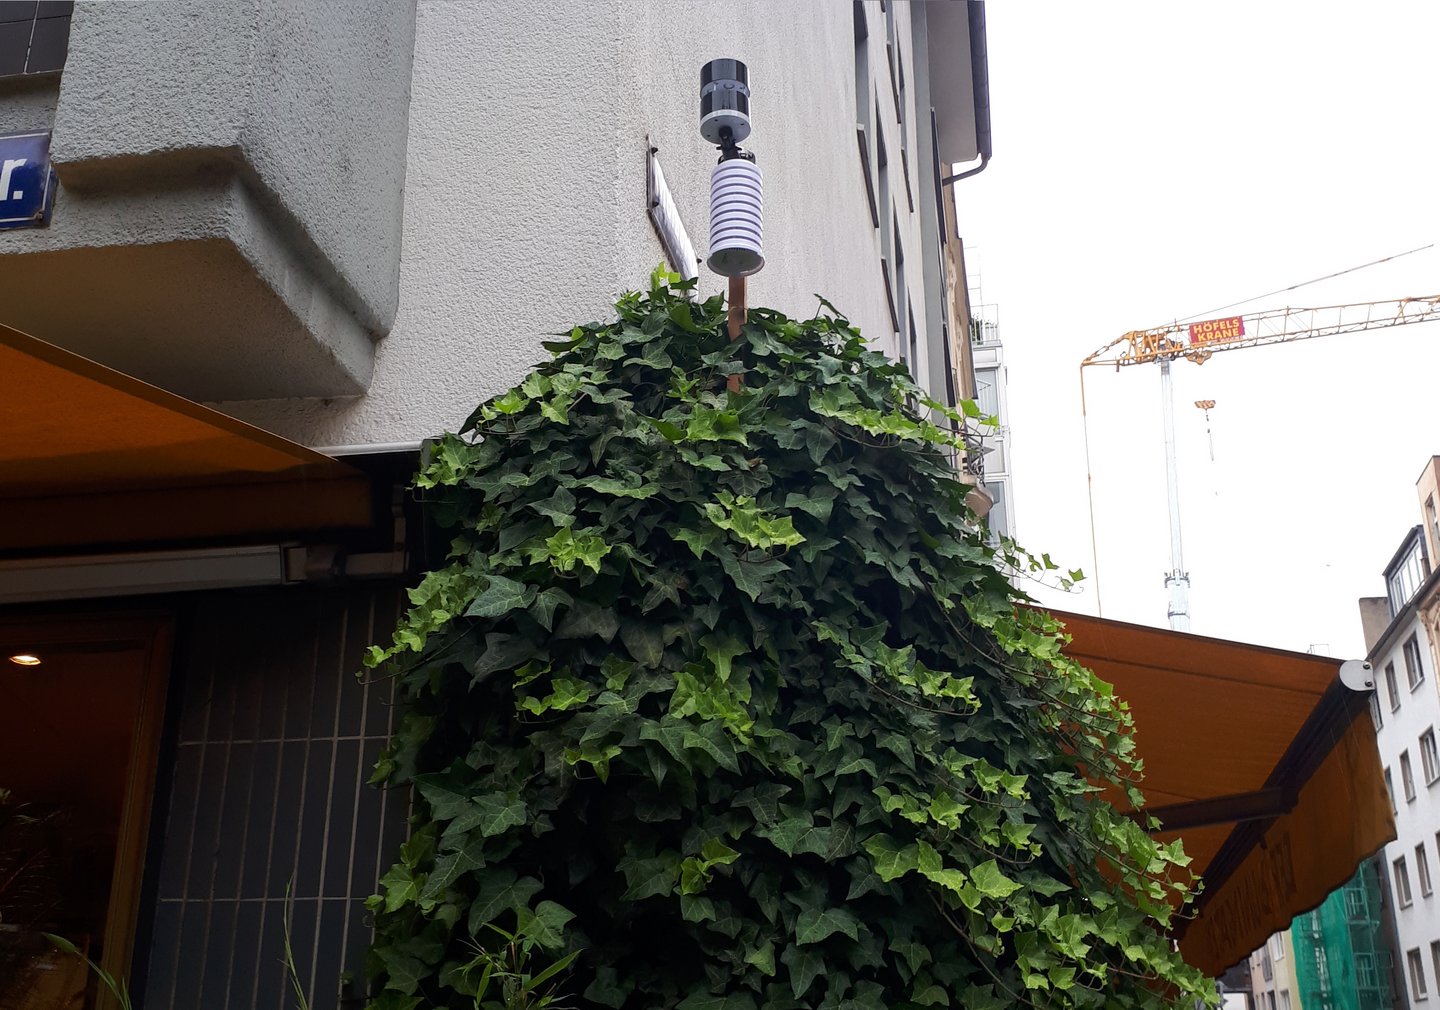 A NETATMO weather sensor in front of a building wall